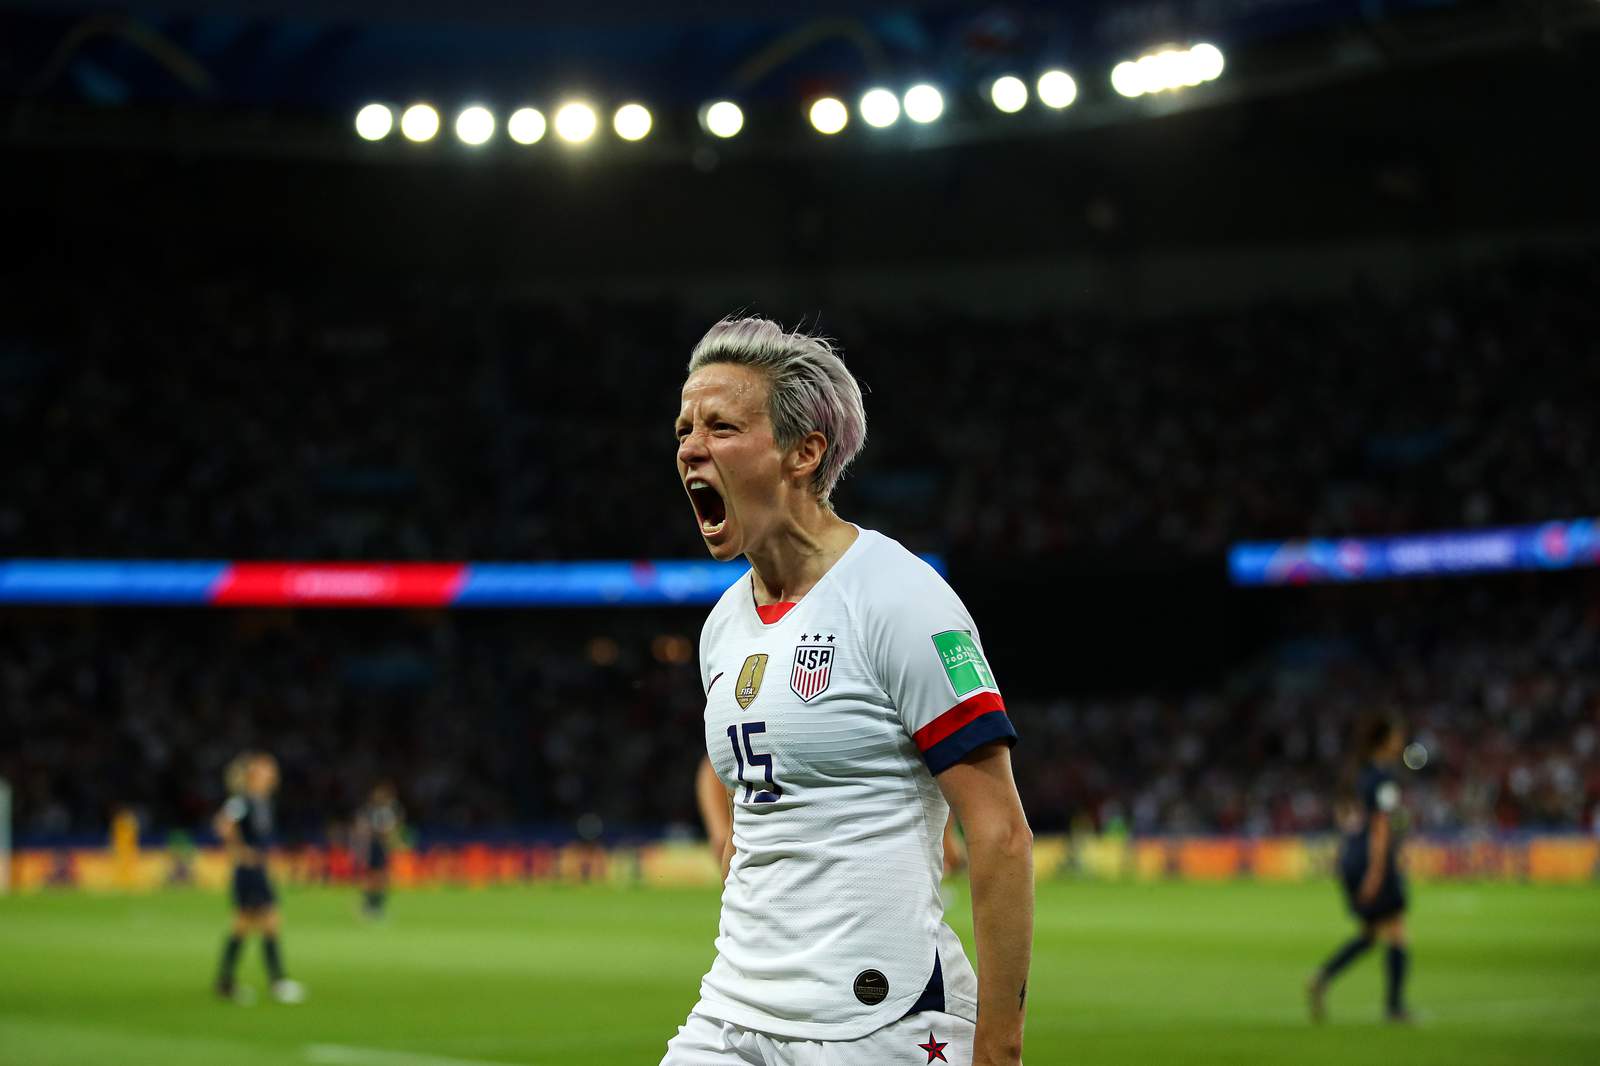 HBO Max documentary to focus on U.S. Women’s soccer team, equal pay lawsuits